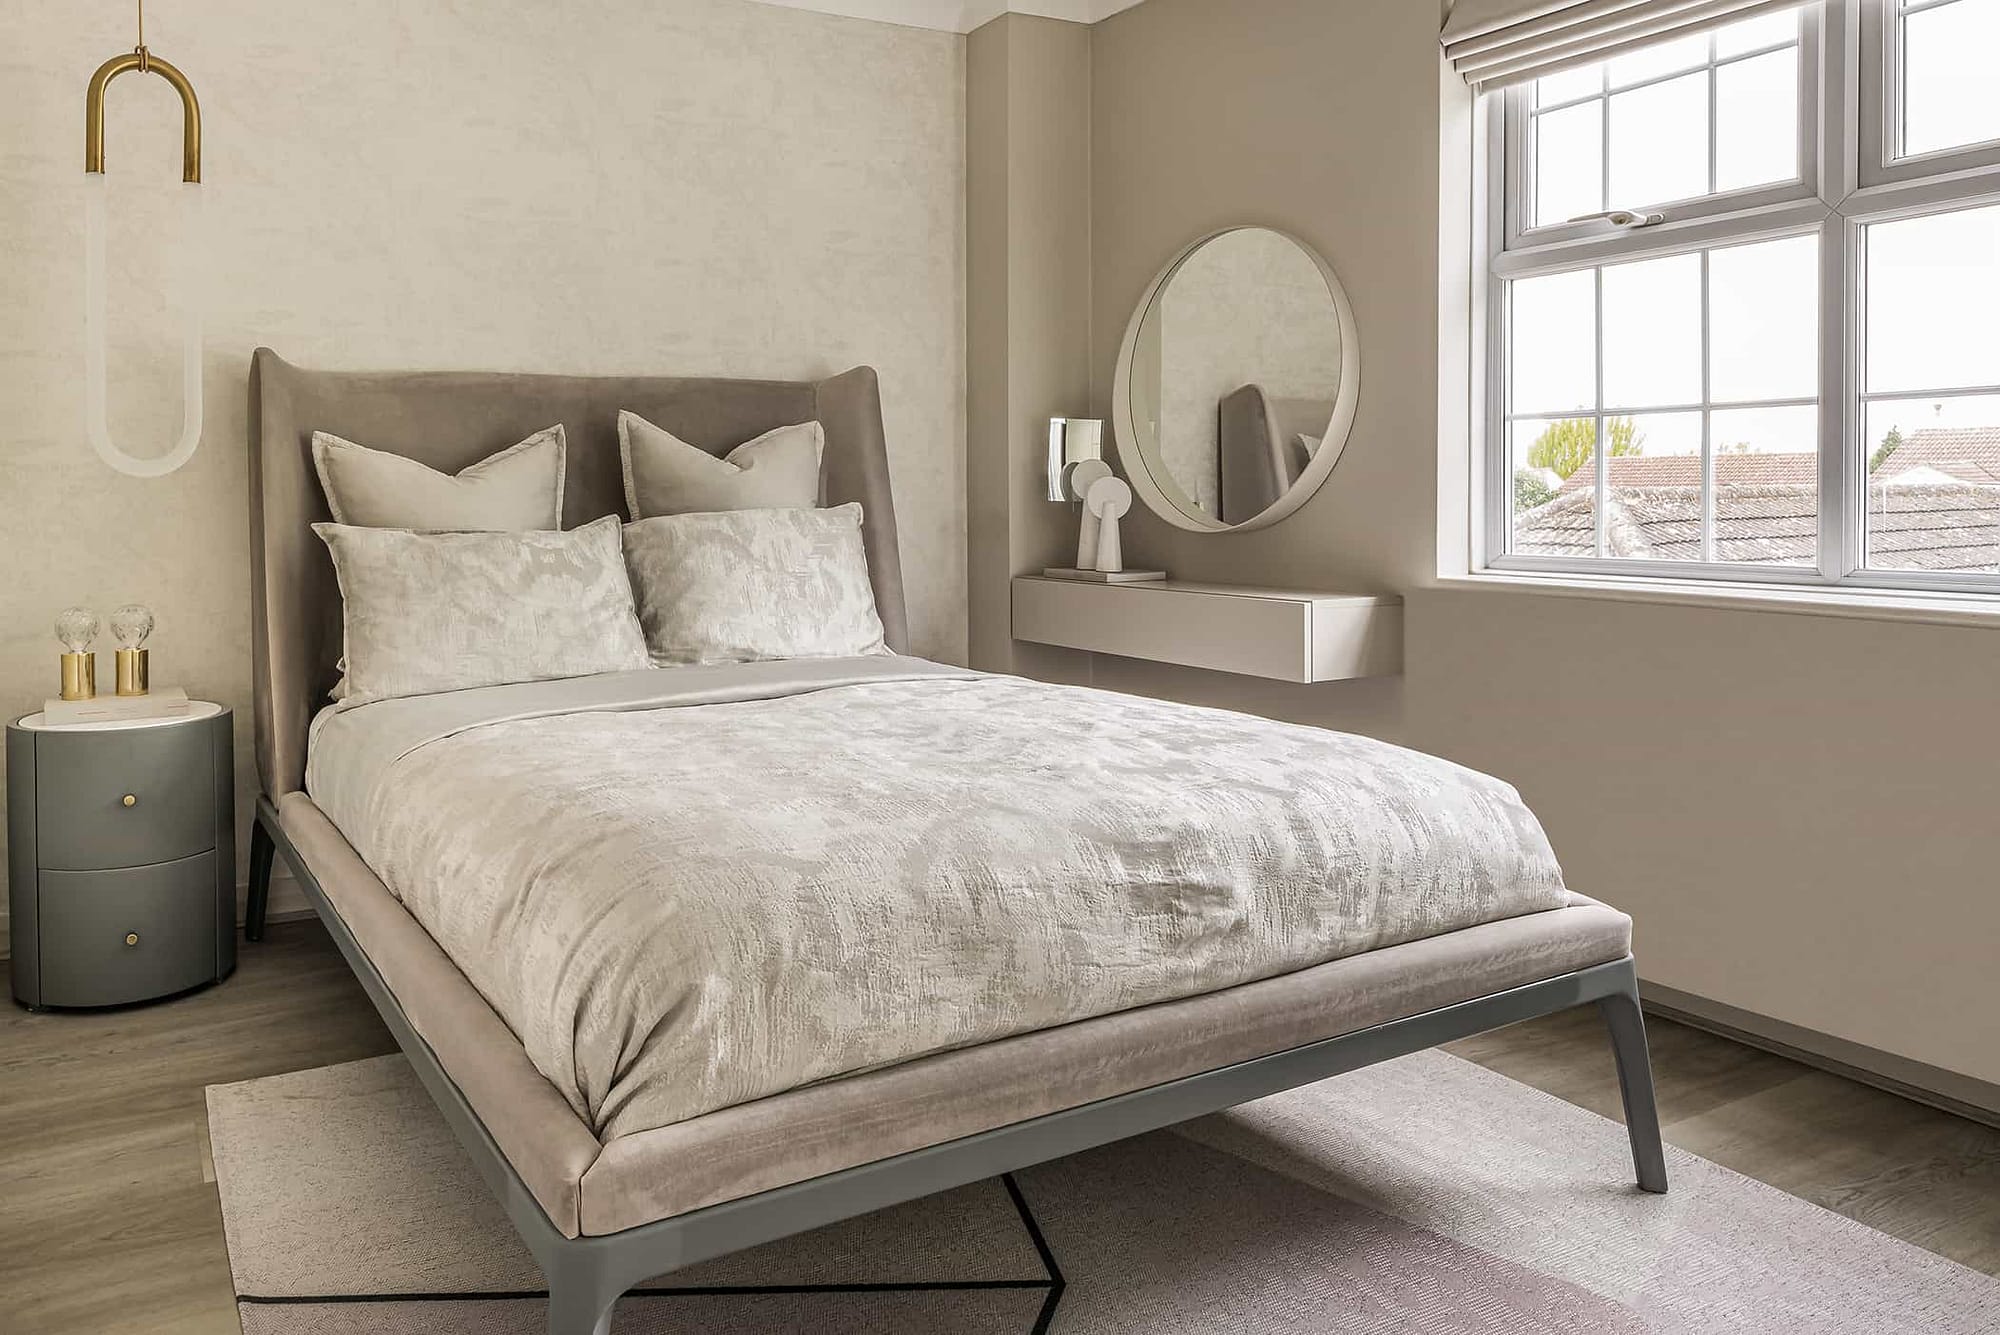 Woodford Green interior double bed and mirror